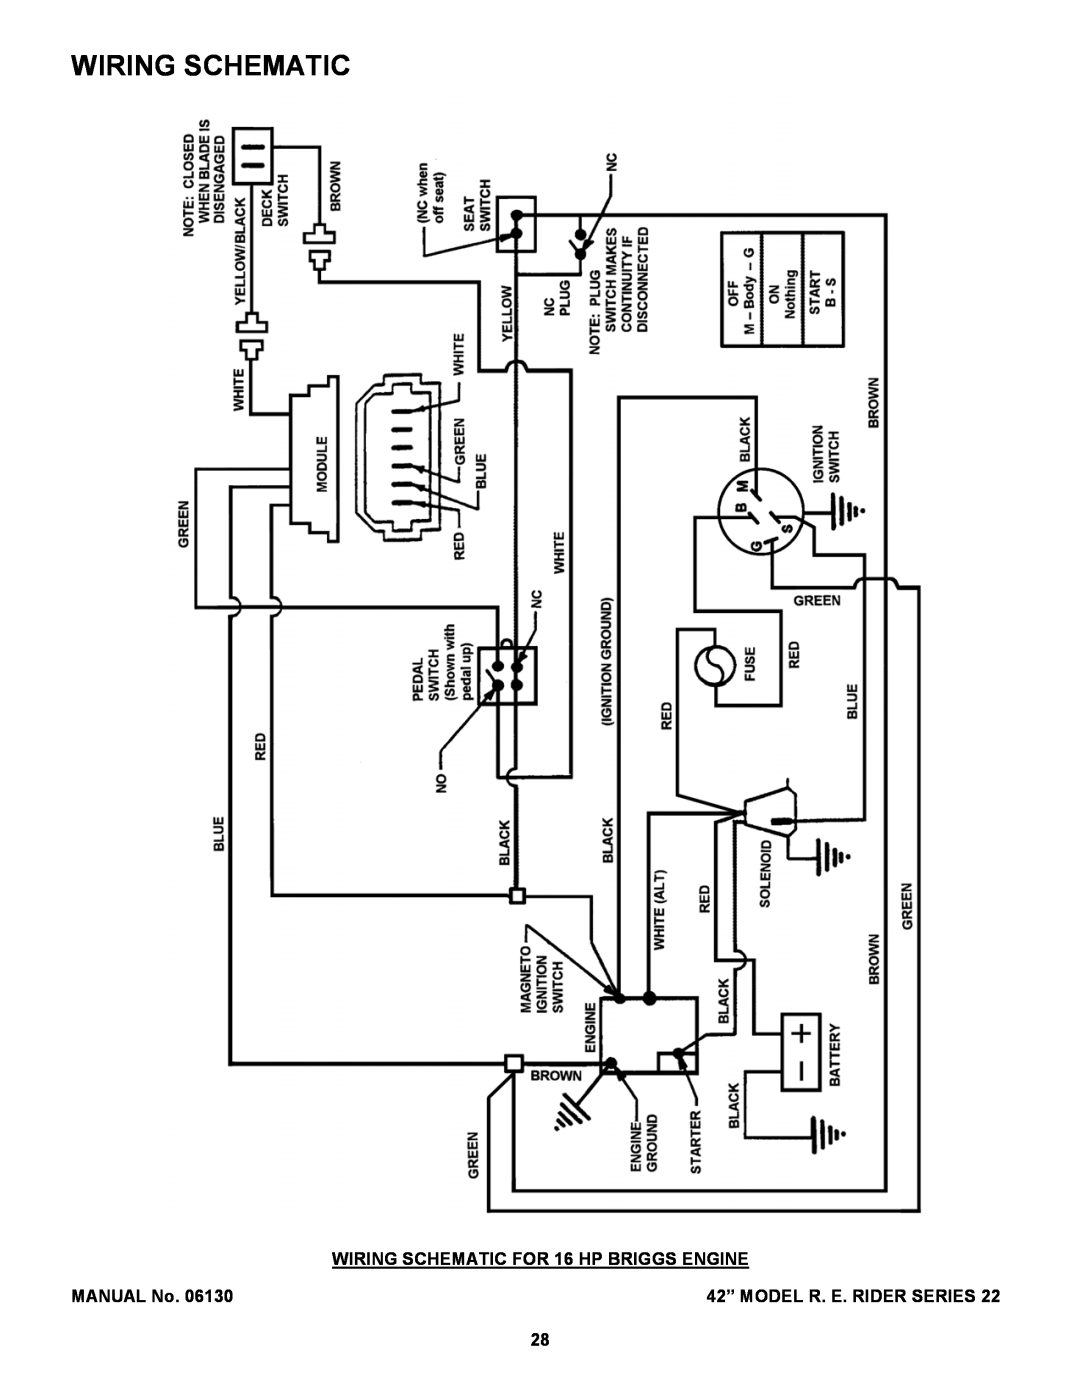 Snapper 421622BVE Wiring Schematic, WIRING SCHEMATIC FOR 16 HP BRIGGS ENGINE, MANUAL No, 42” MODEL R. E. RIDER SERIES 